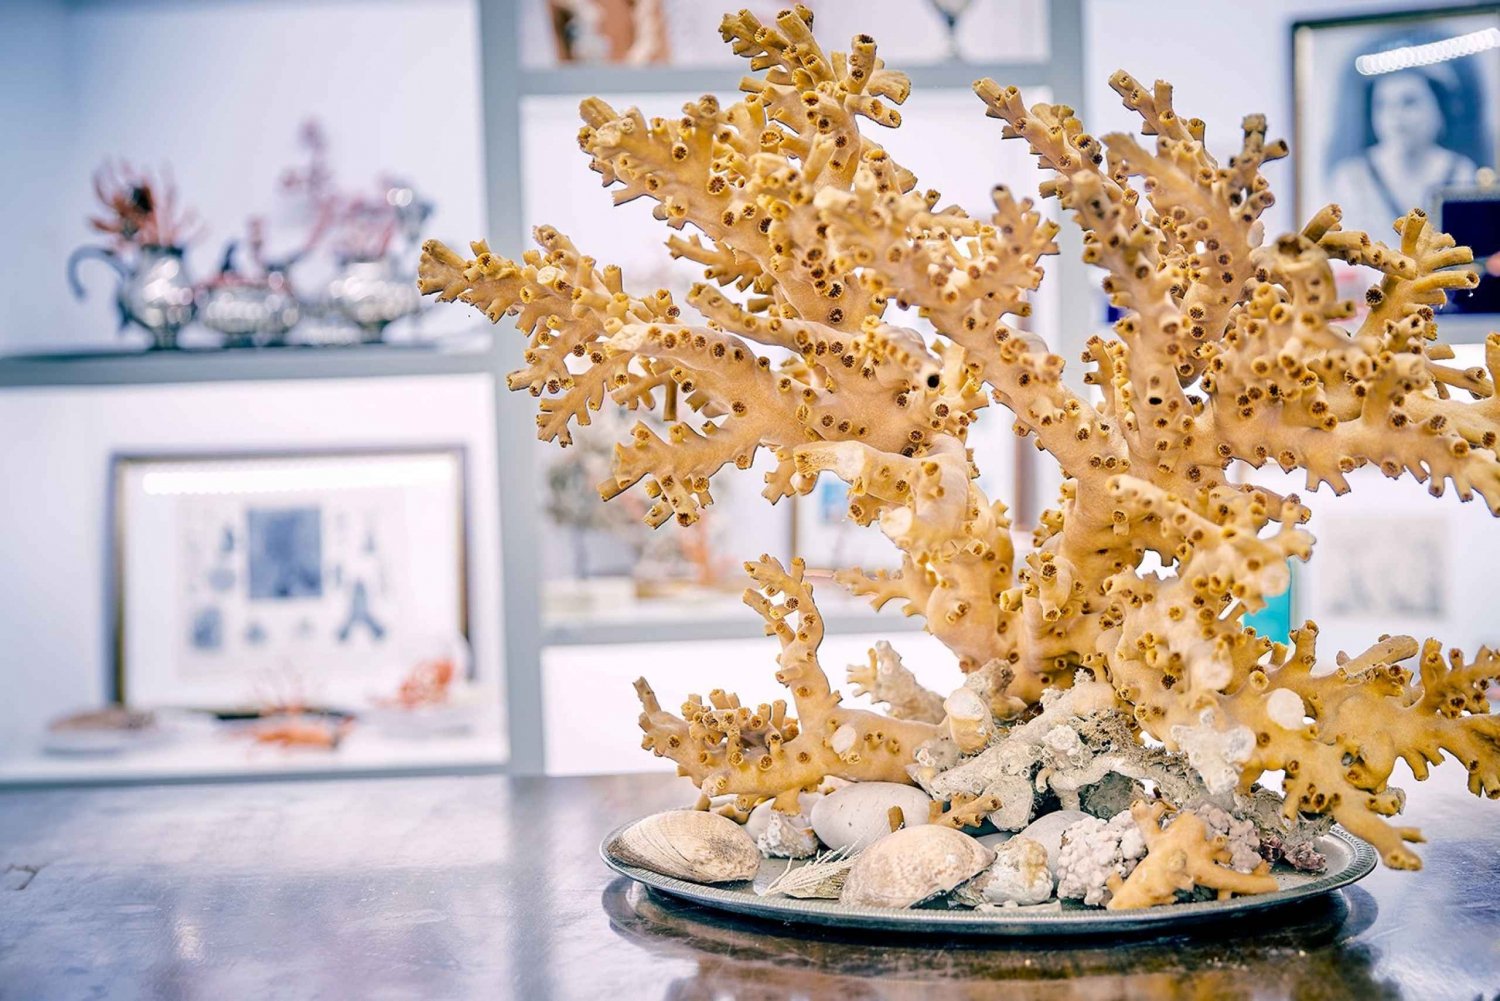 Coral workshop and visit of the museum in Sicacca